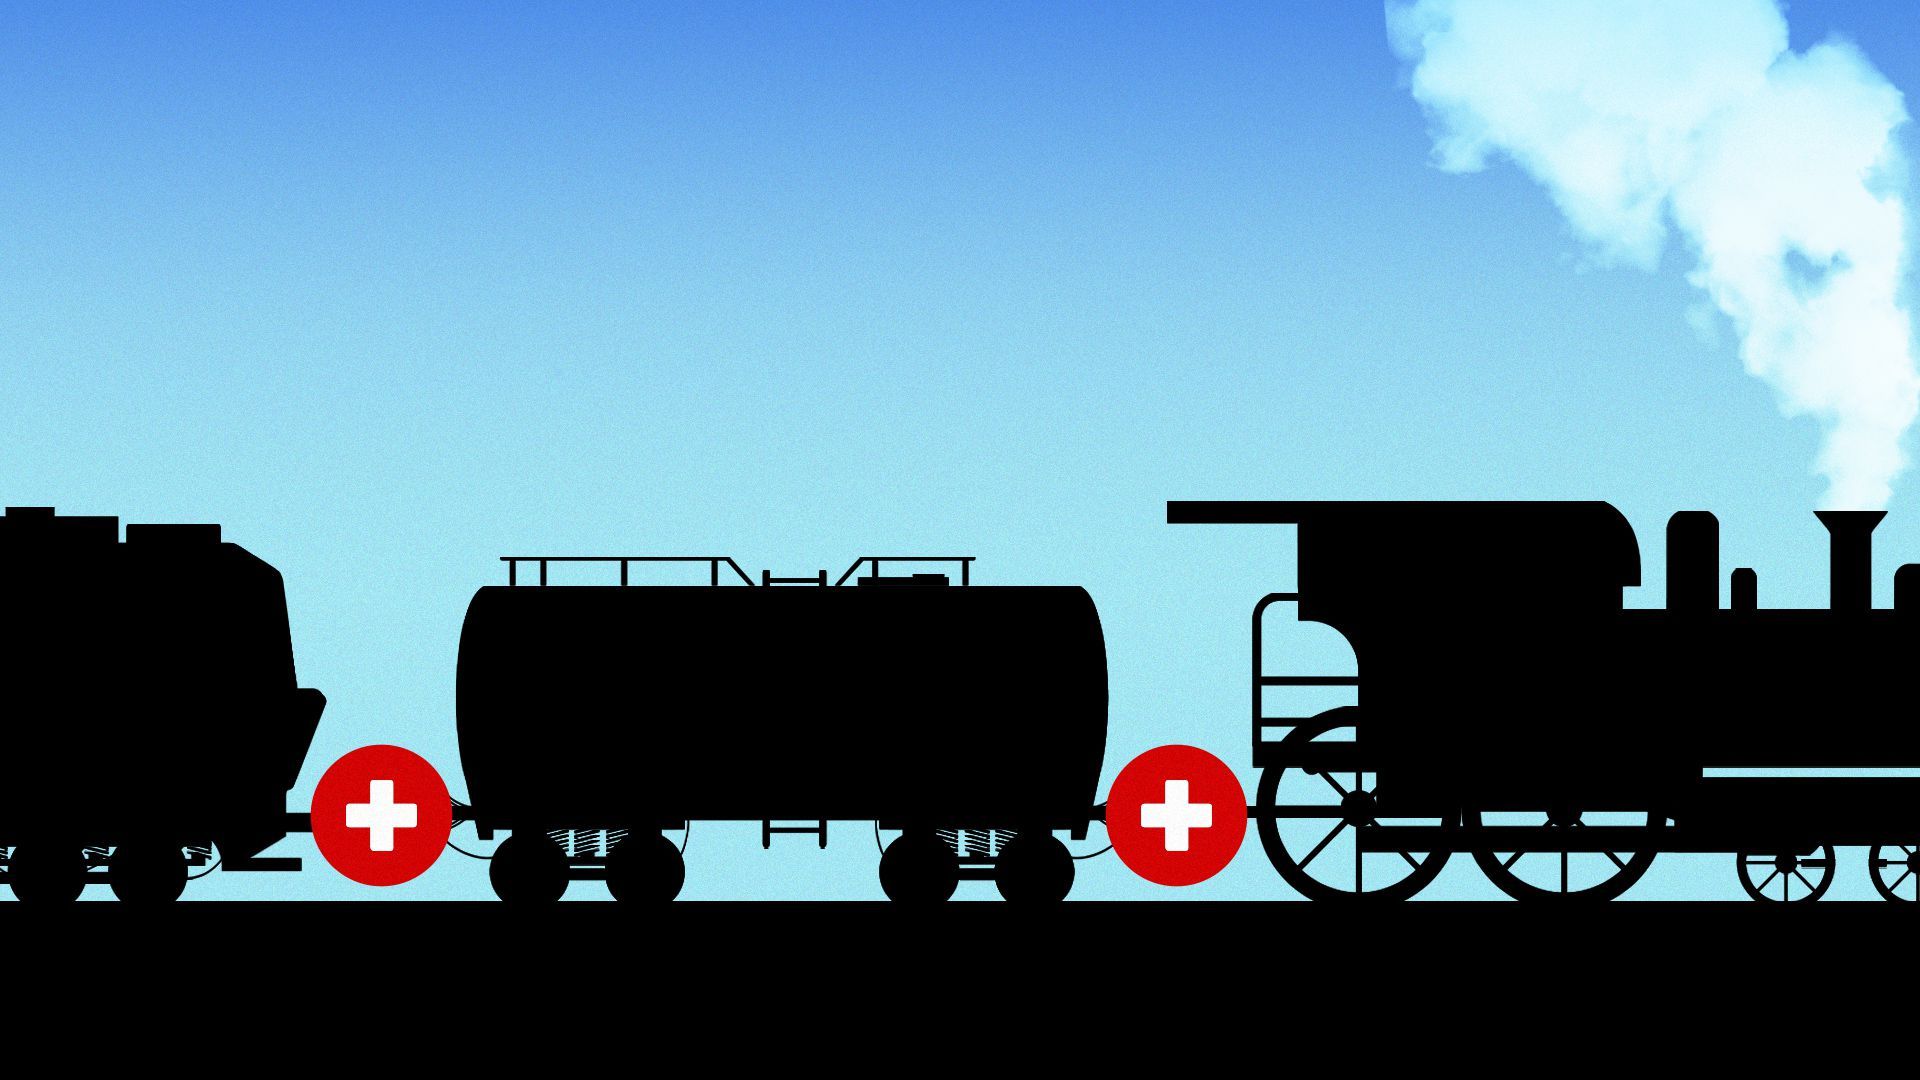 Illustration of train car silhouettes connected by red crosses.